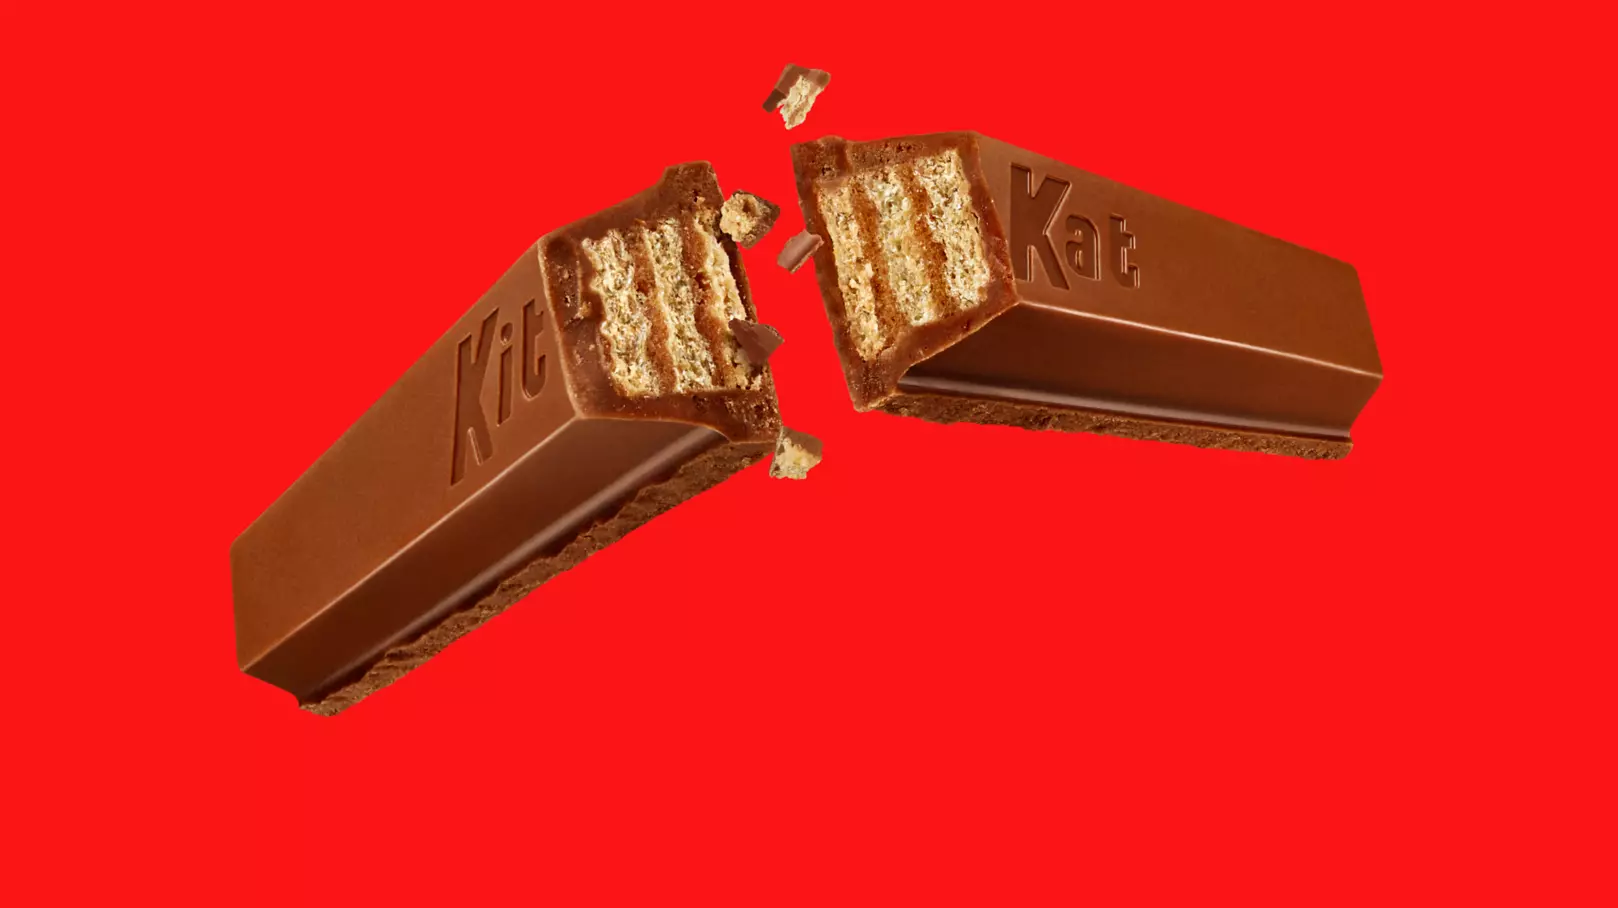 KIT KAT® Easter Milk Chocolate Candy Bars, 1.5 oz, 6 pack - Out of Package